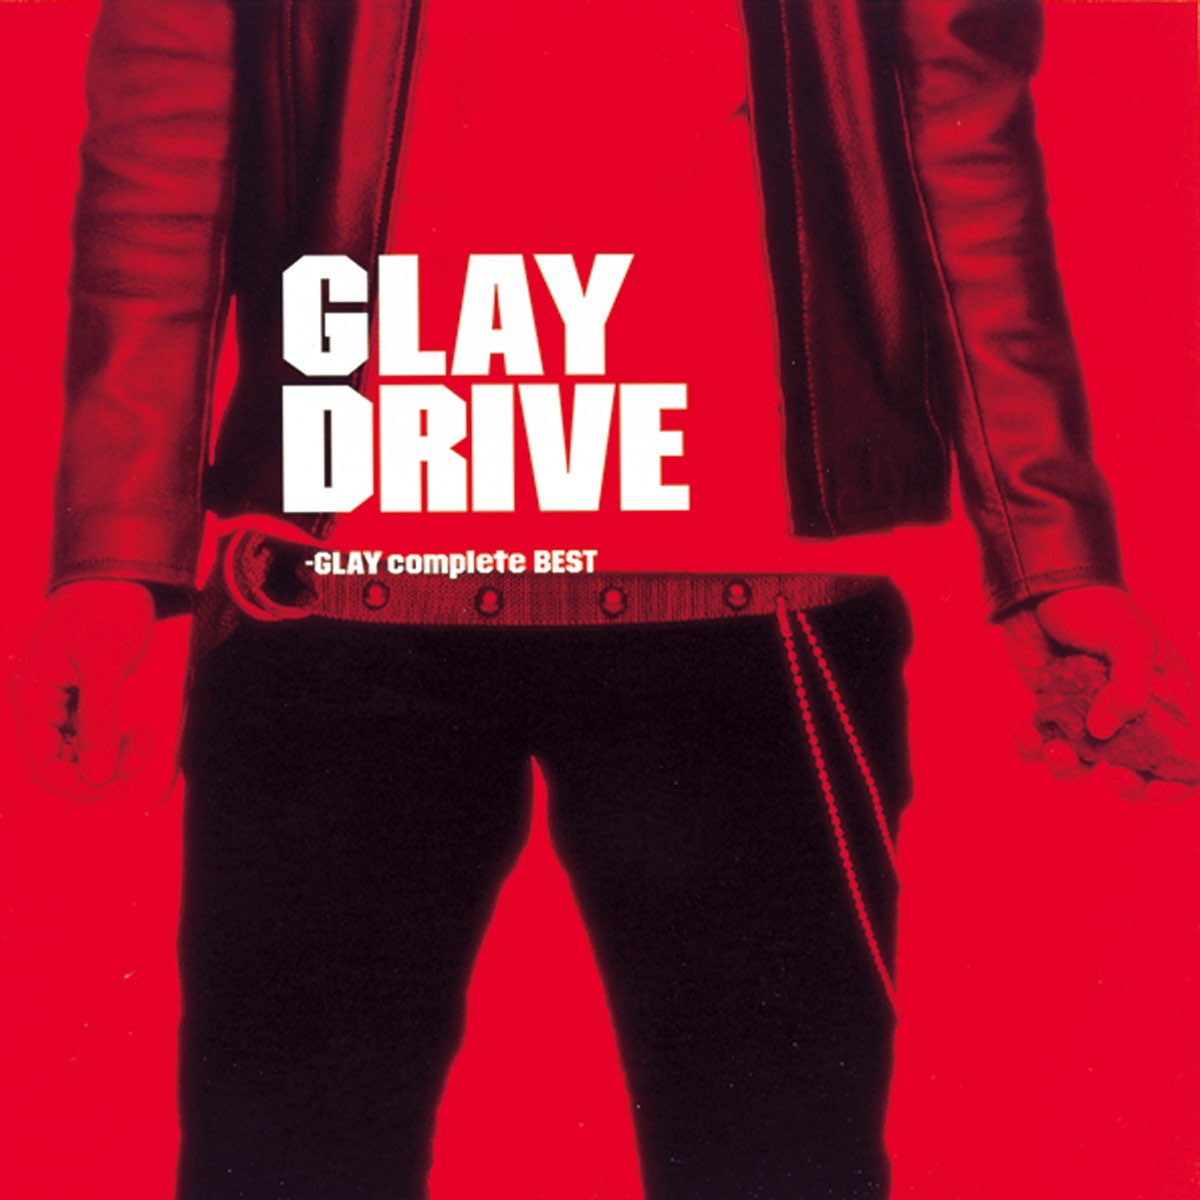 Drive Glay Complete Best By Glay On Apple Music